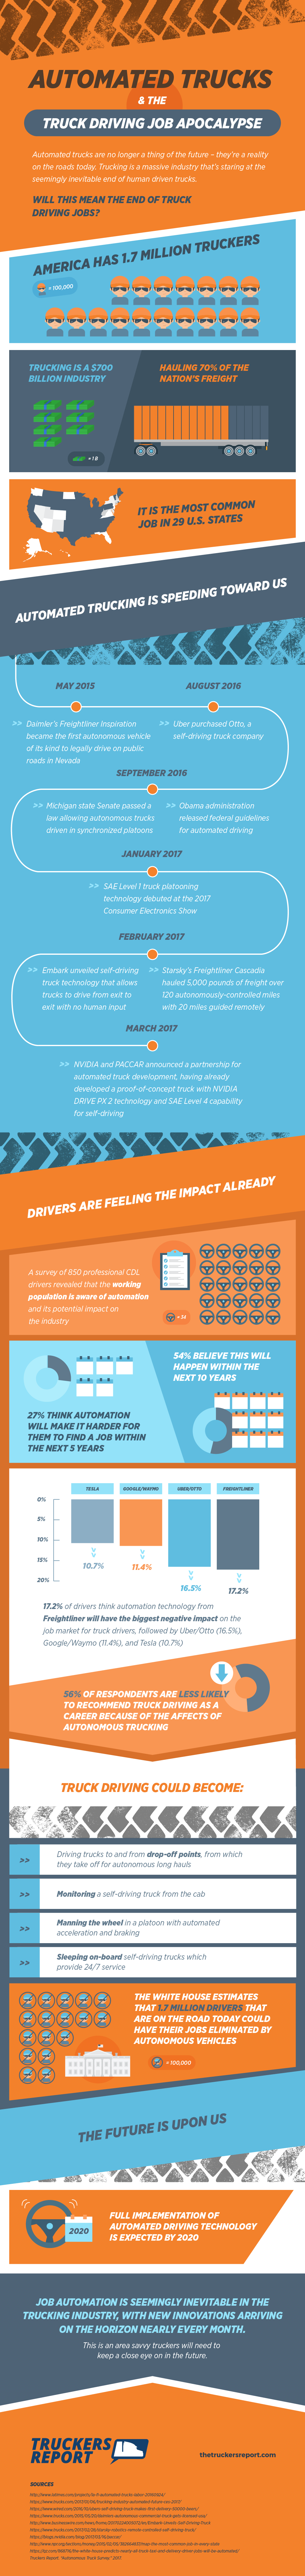 Semi Truck Automation Infographic